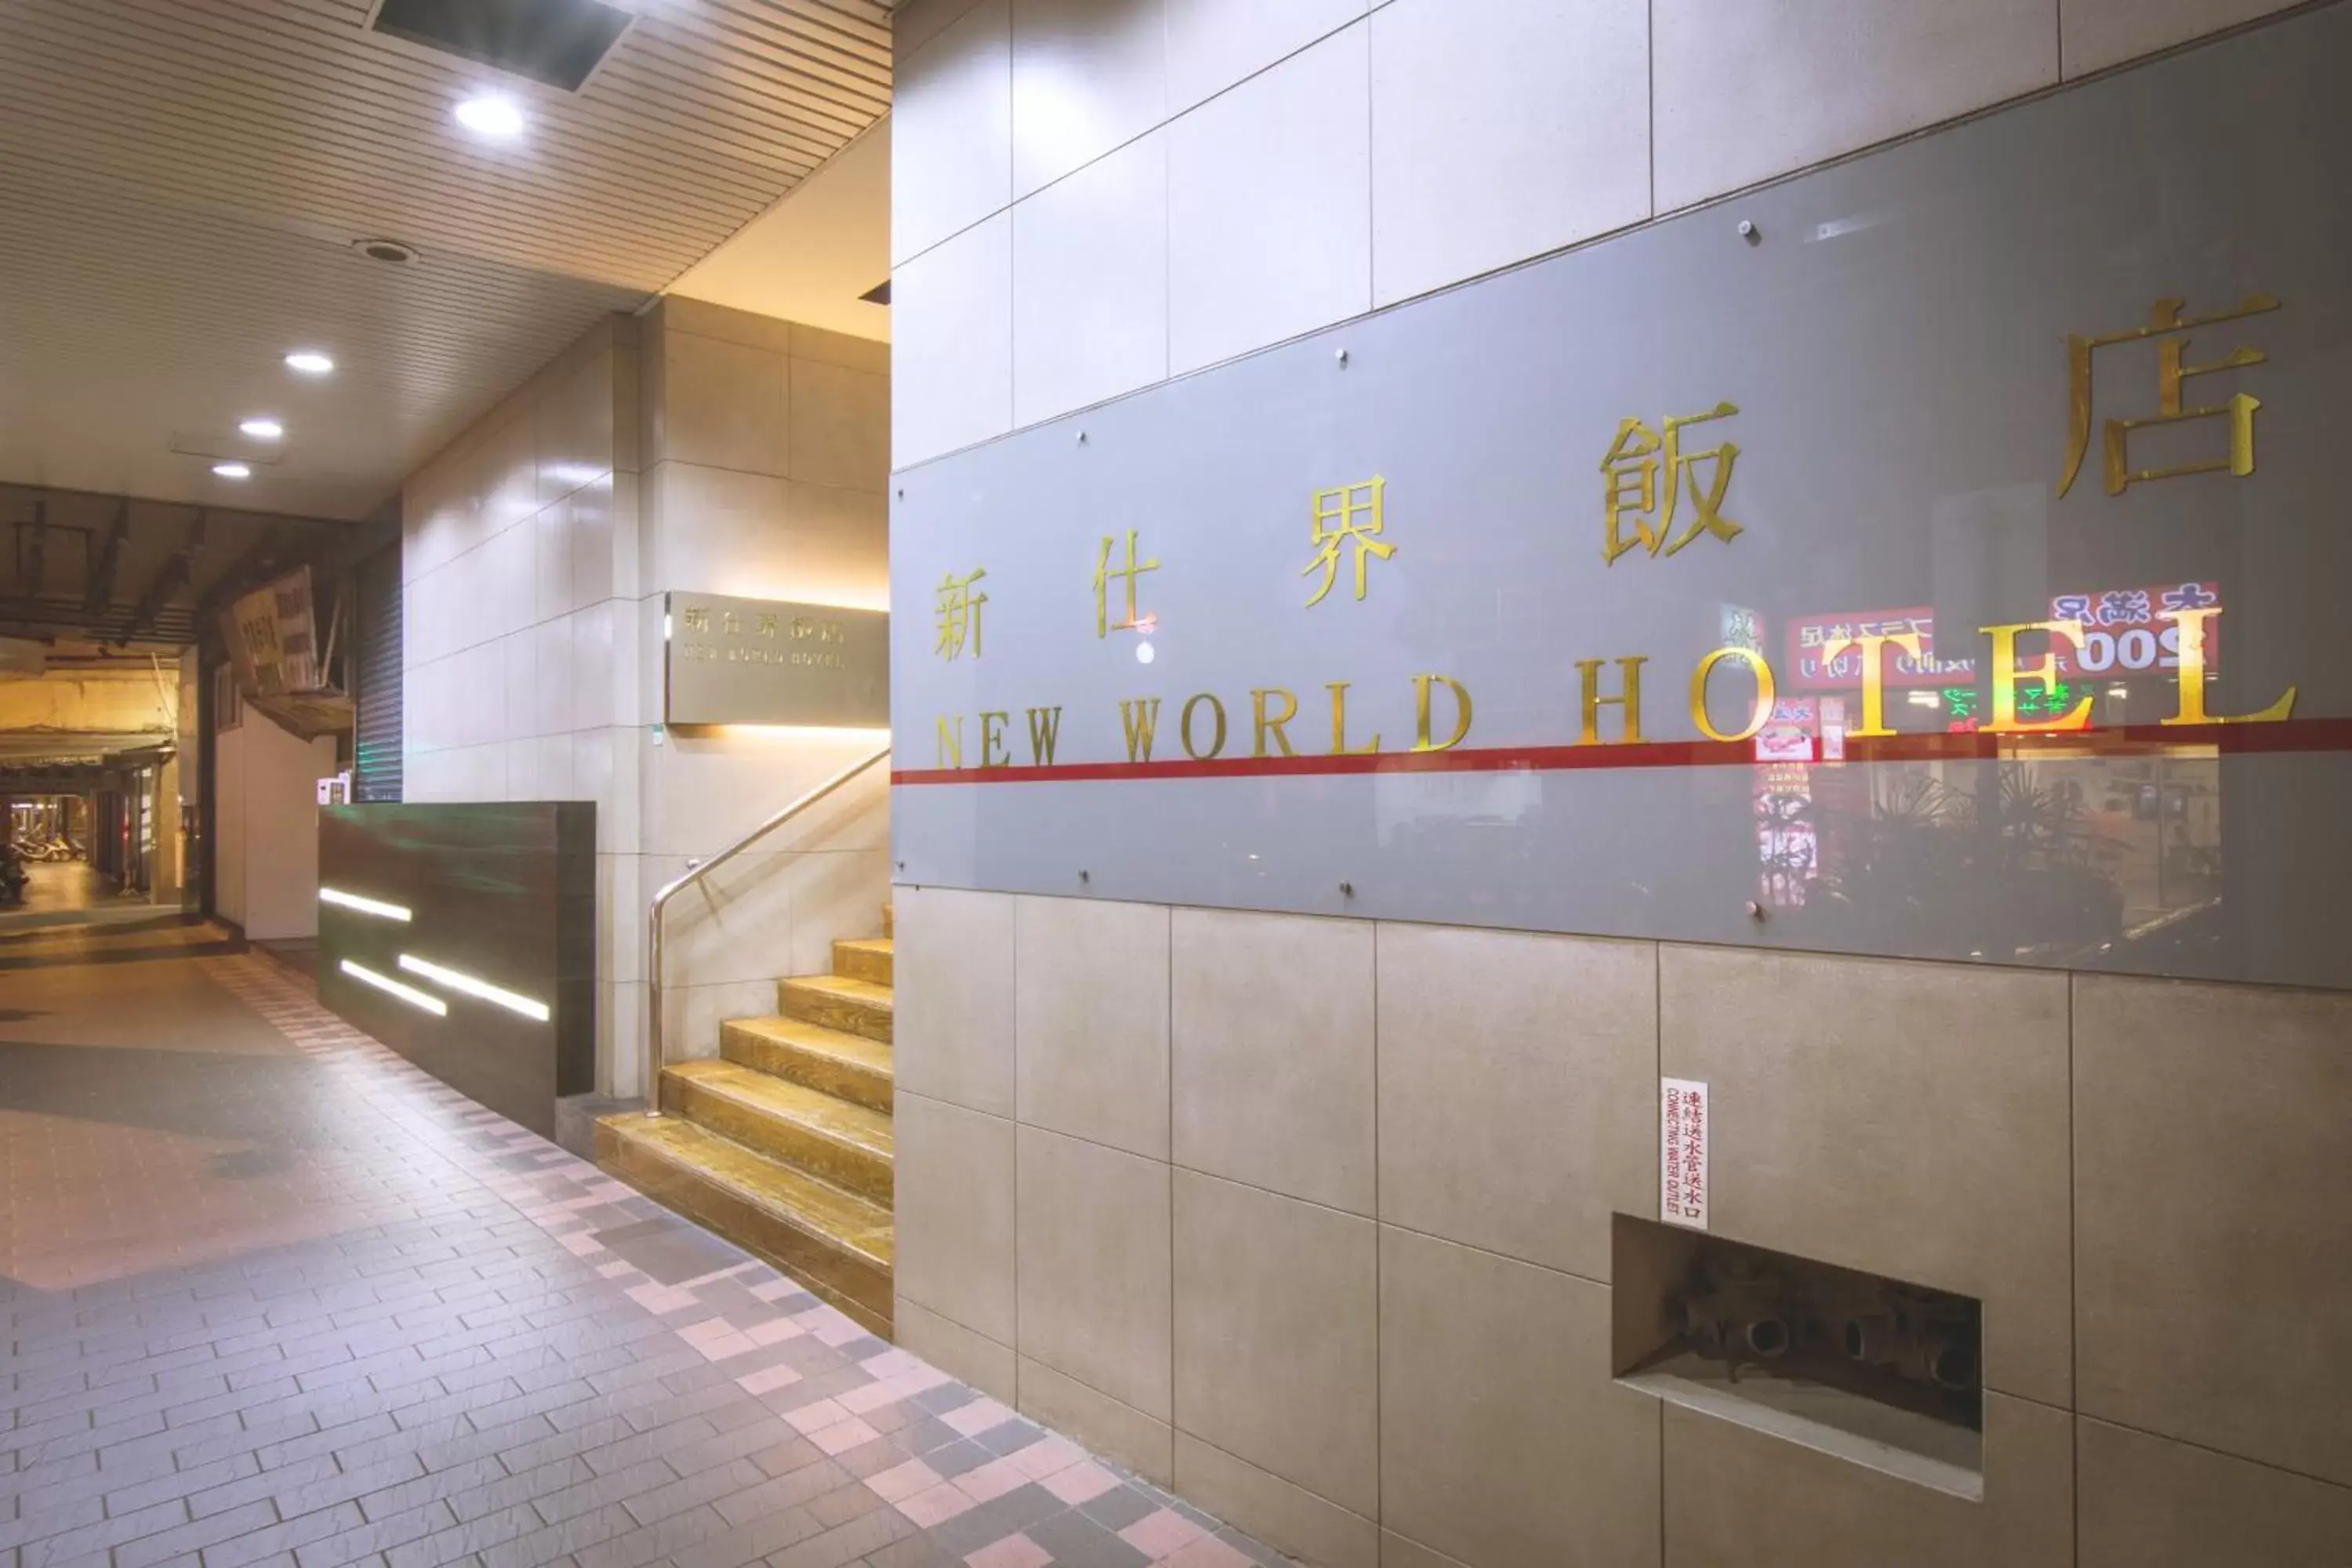 Property building in New World Hotel